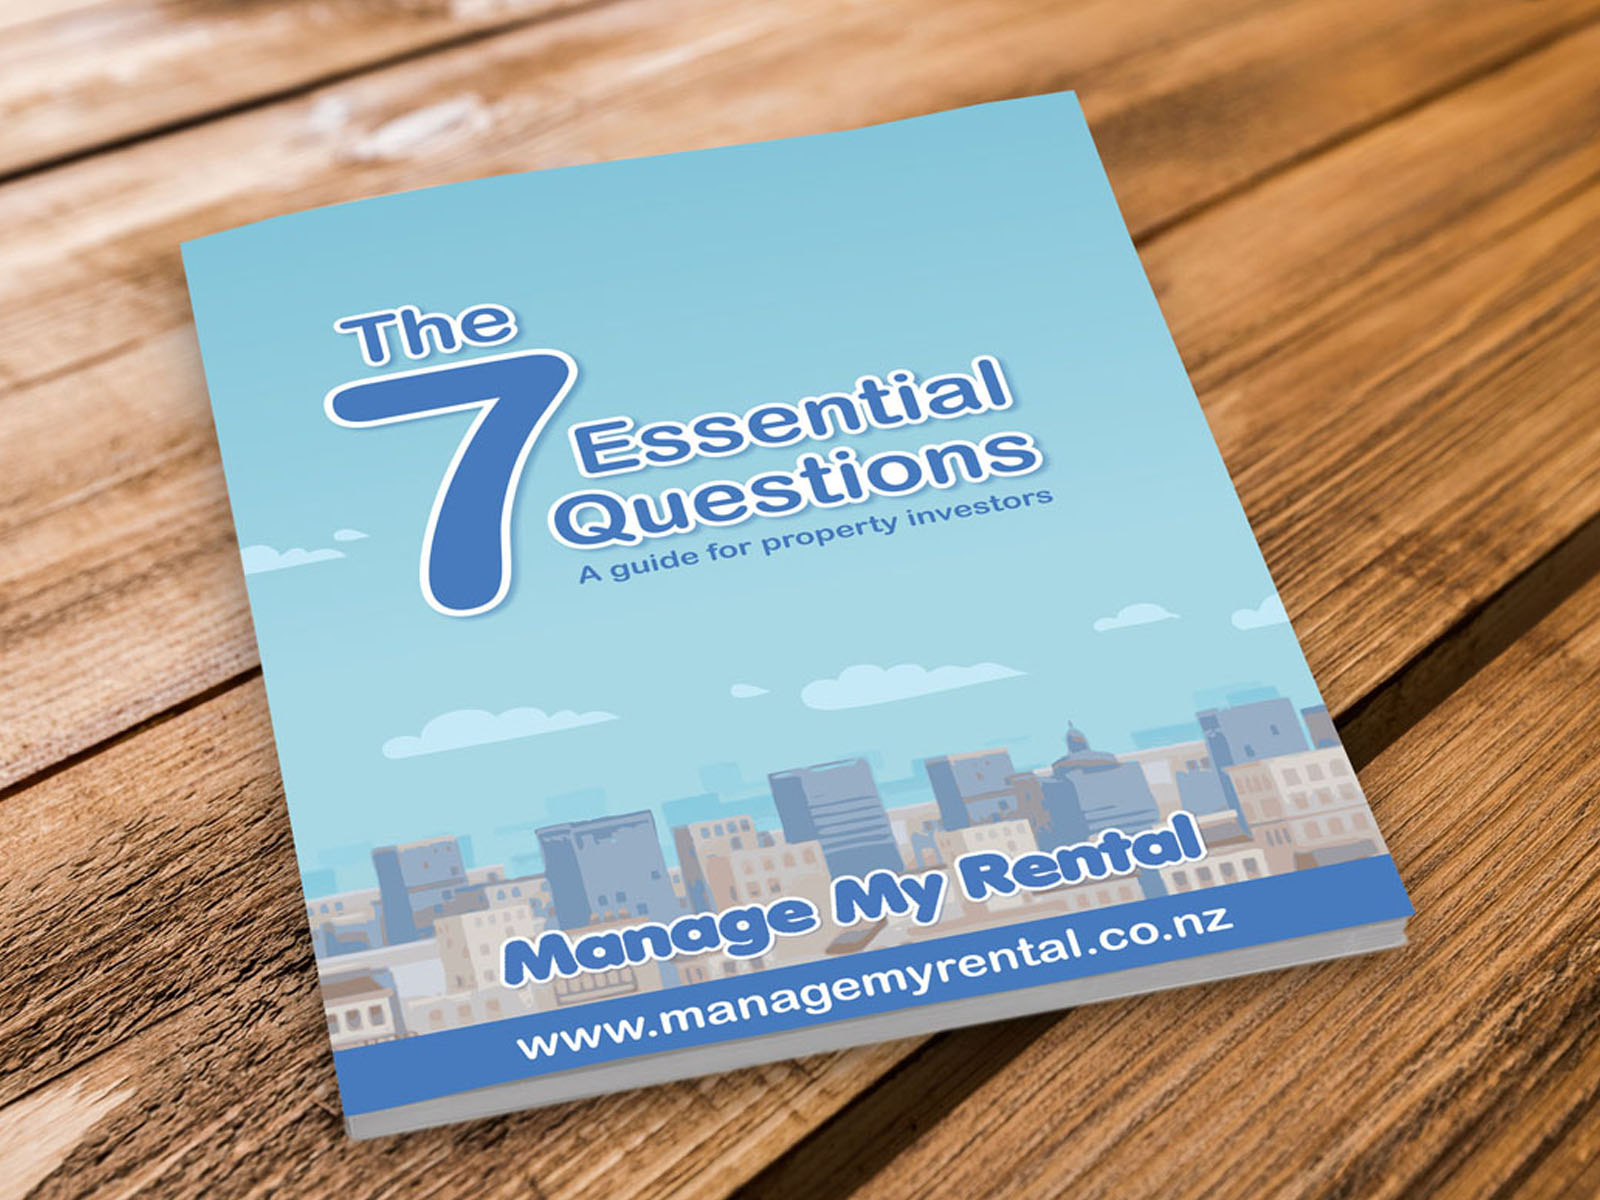 7 Essential Questions book.